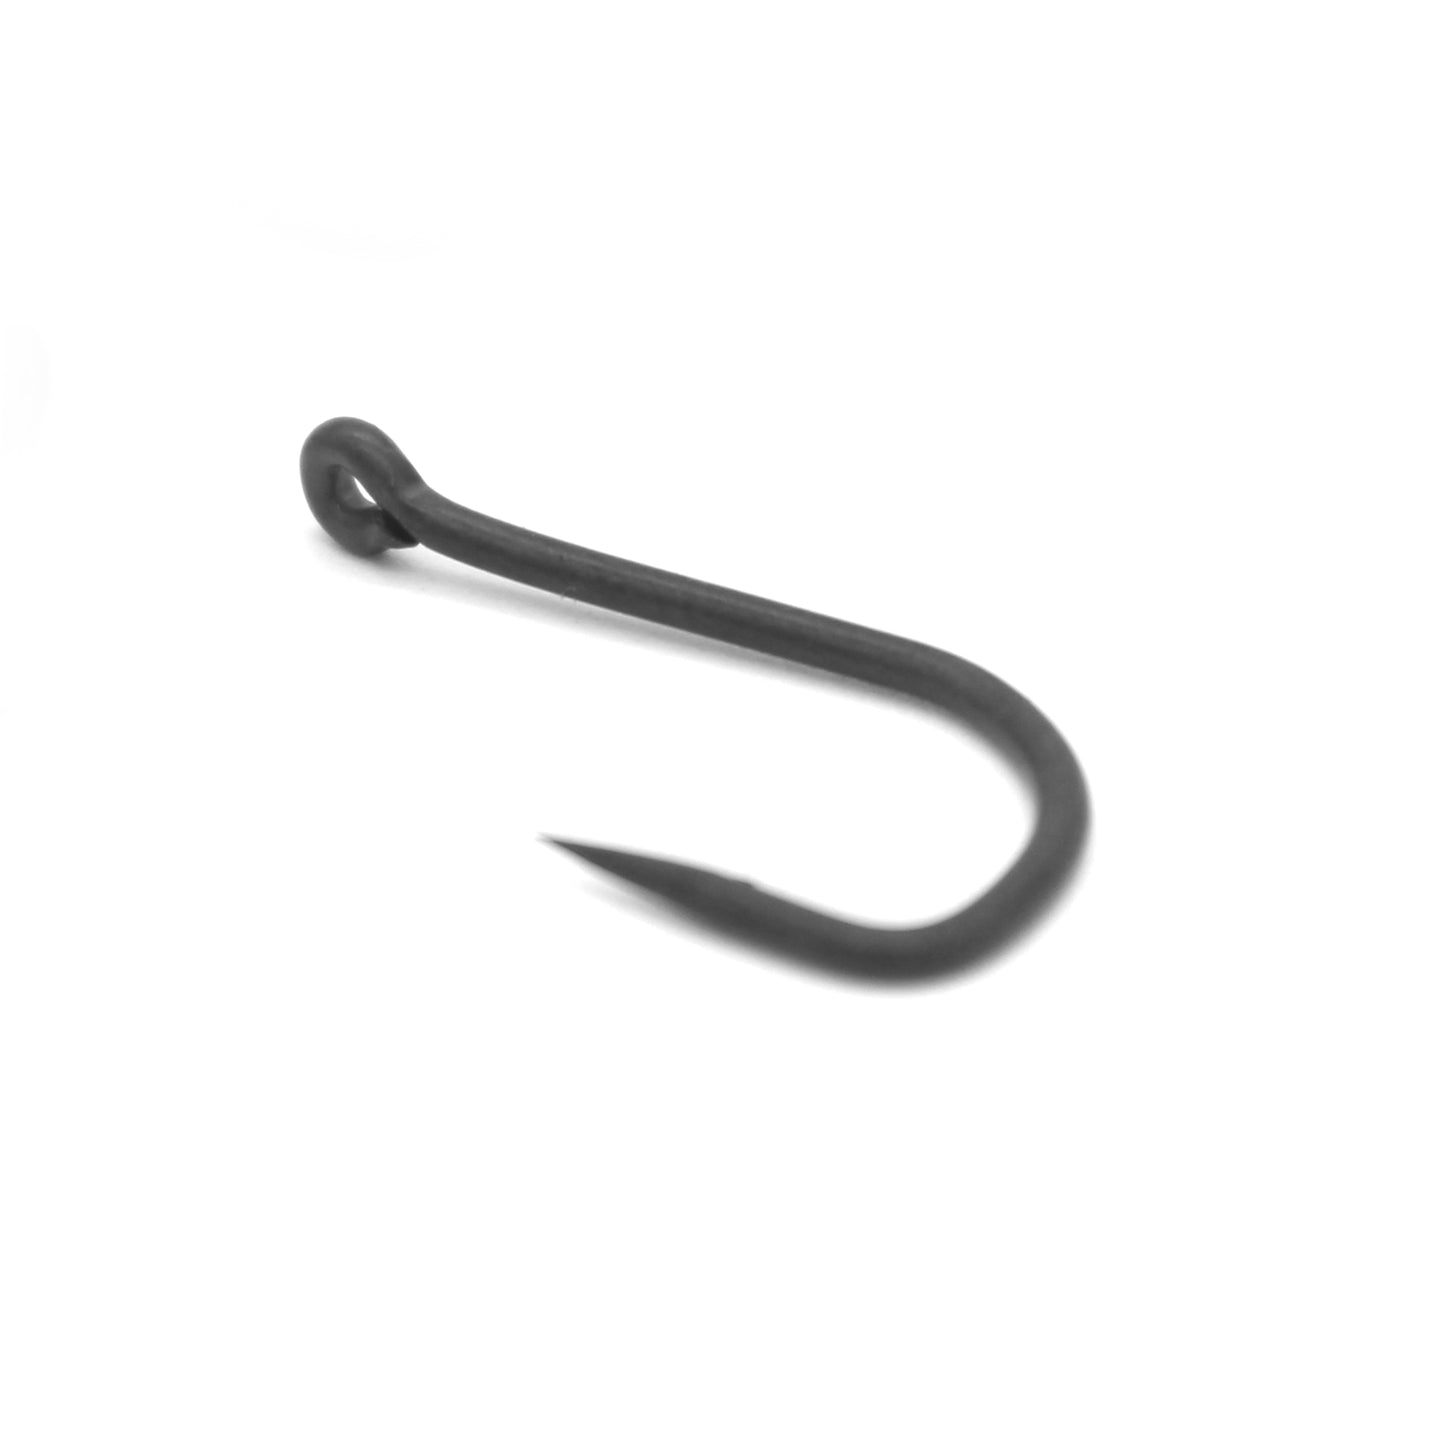 Deception Angling Chod SWG Micro Barbed Fishing Hook